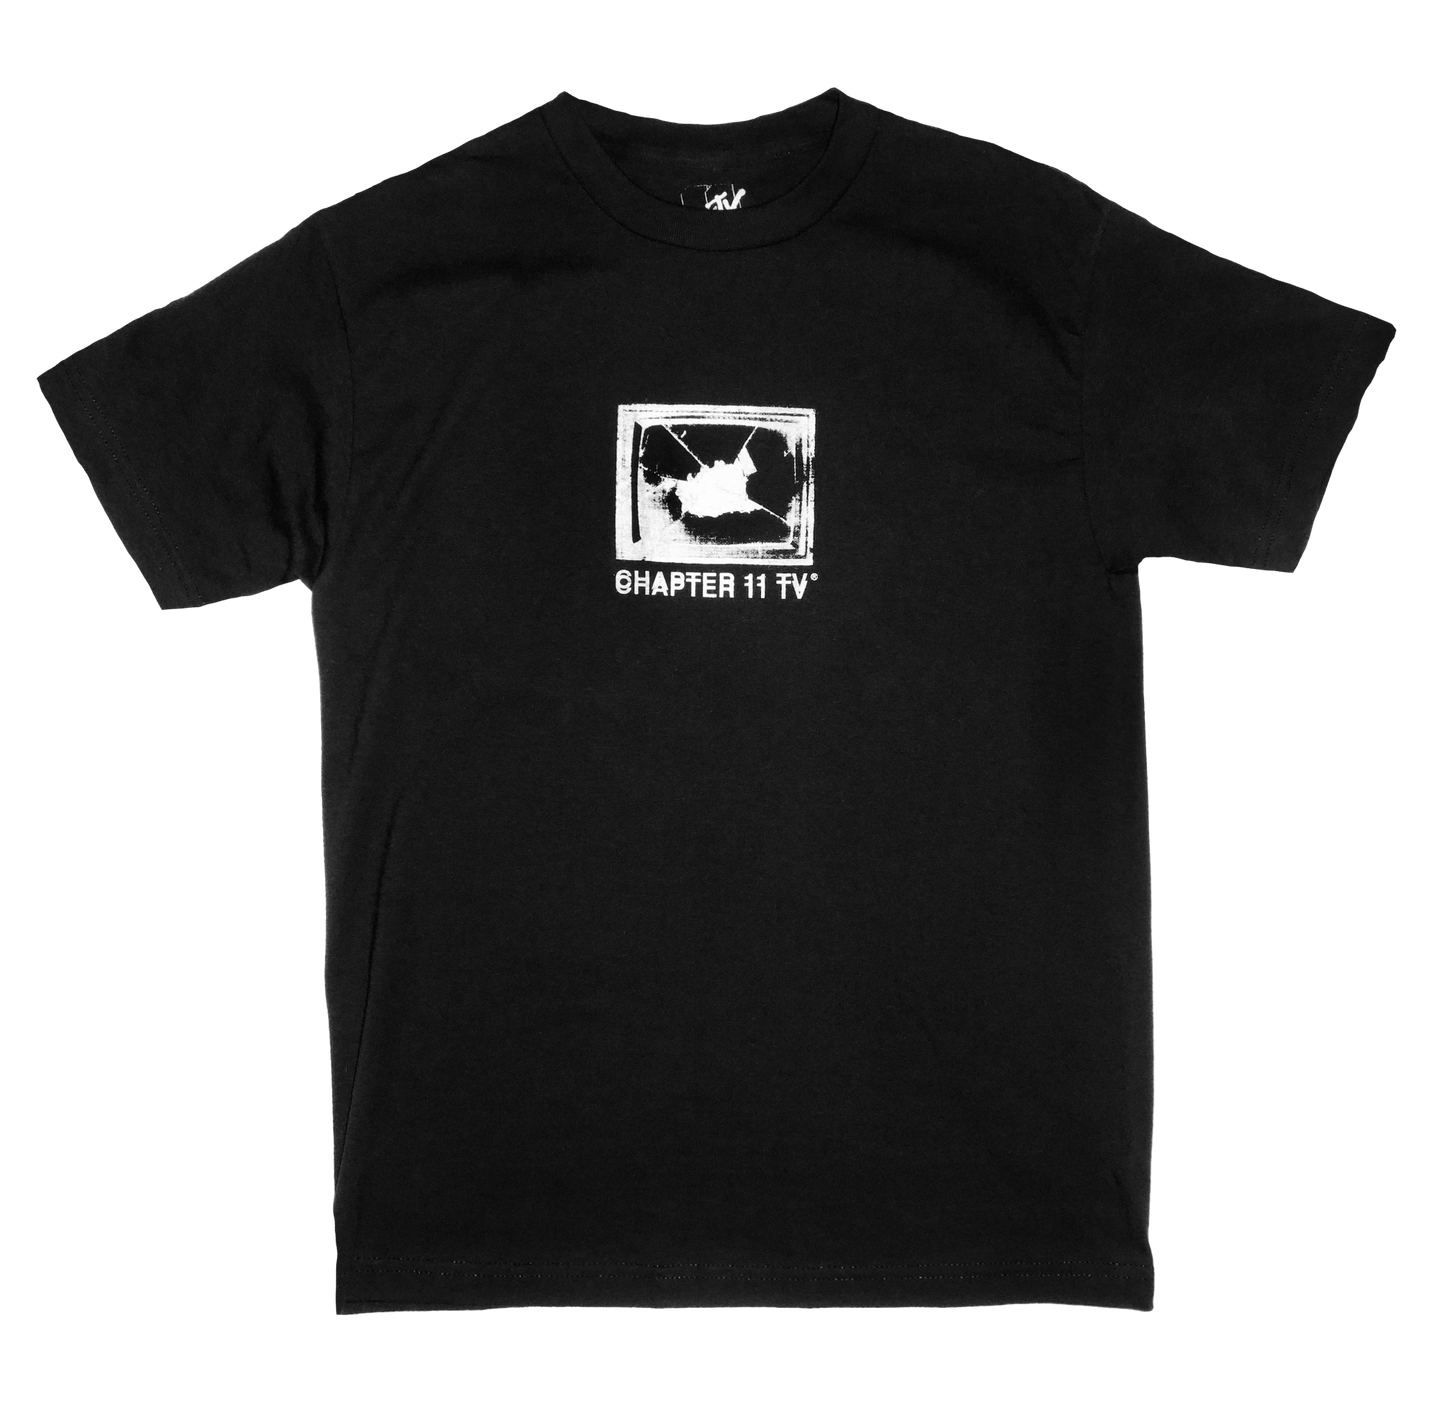 Busted Tv Tee Black